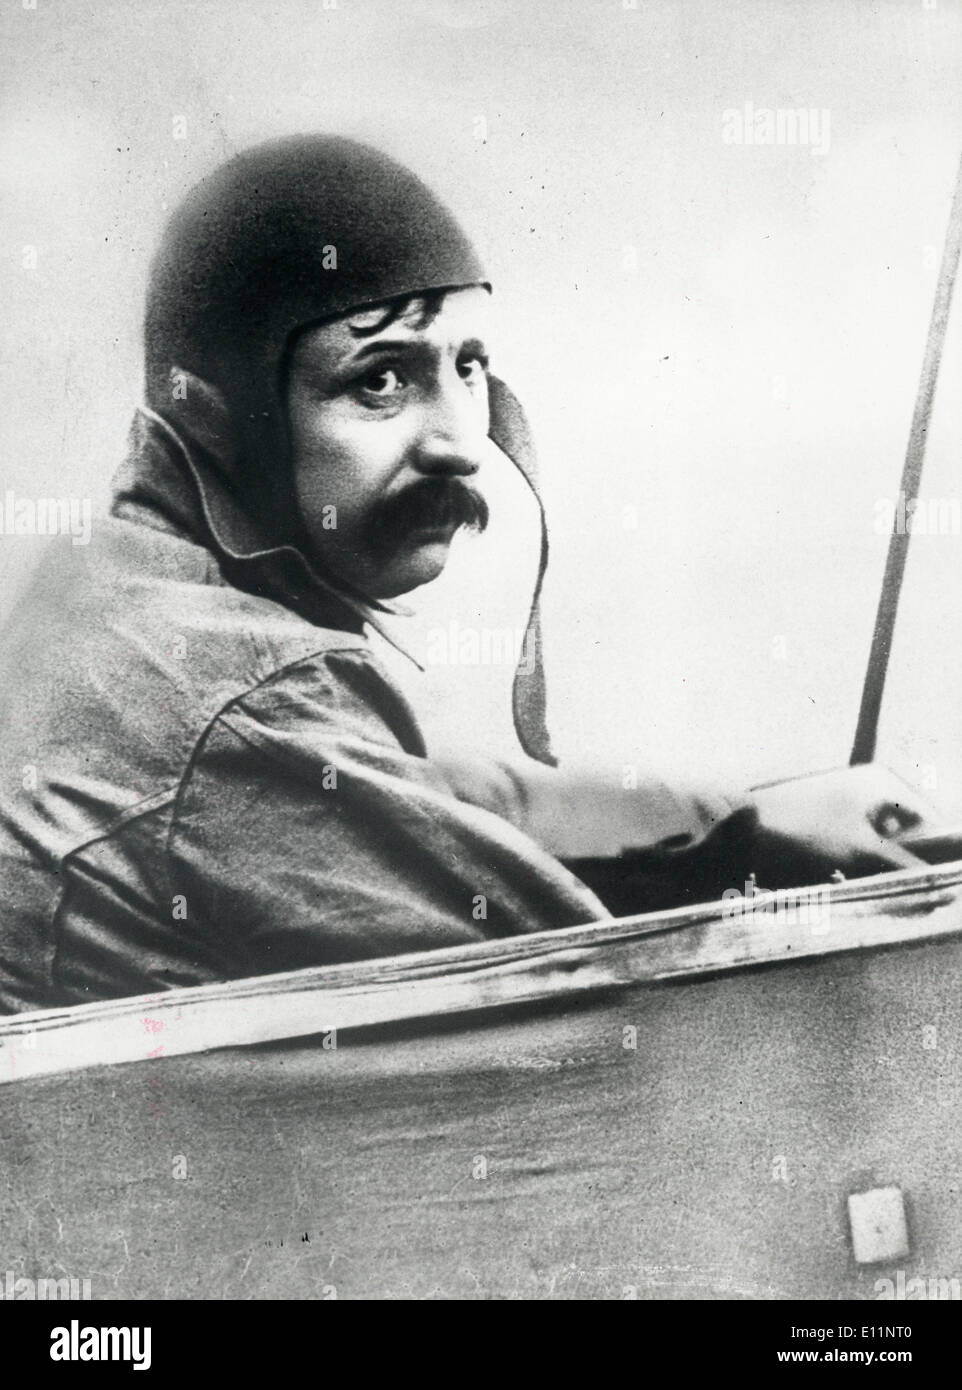 Jul 18, 1979; Calais, France; On July 25th 1909, Mr. LOUIS BLERIOT made his first journey on his plane through La Manche. The Stock Photo